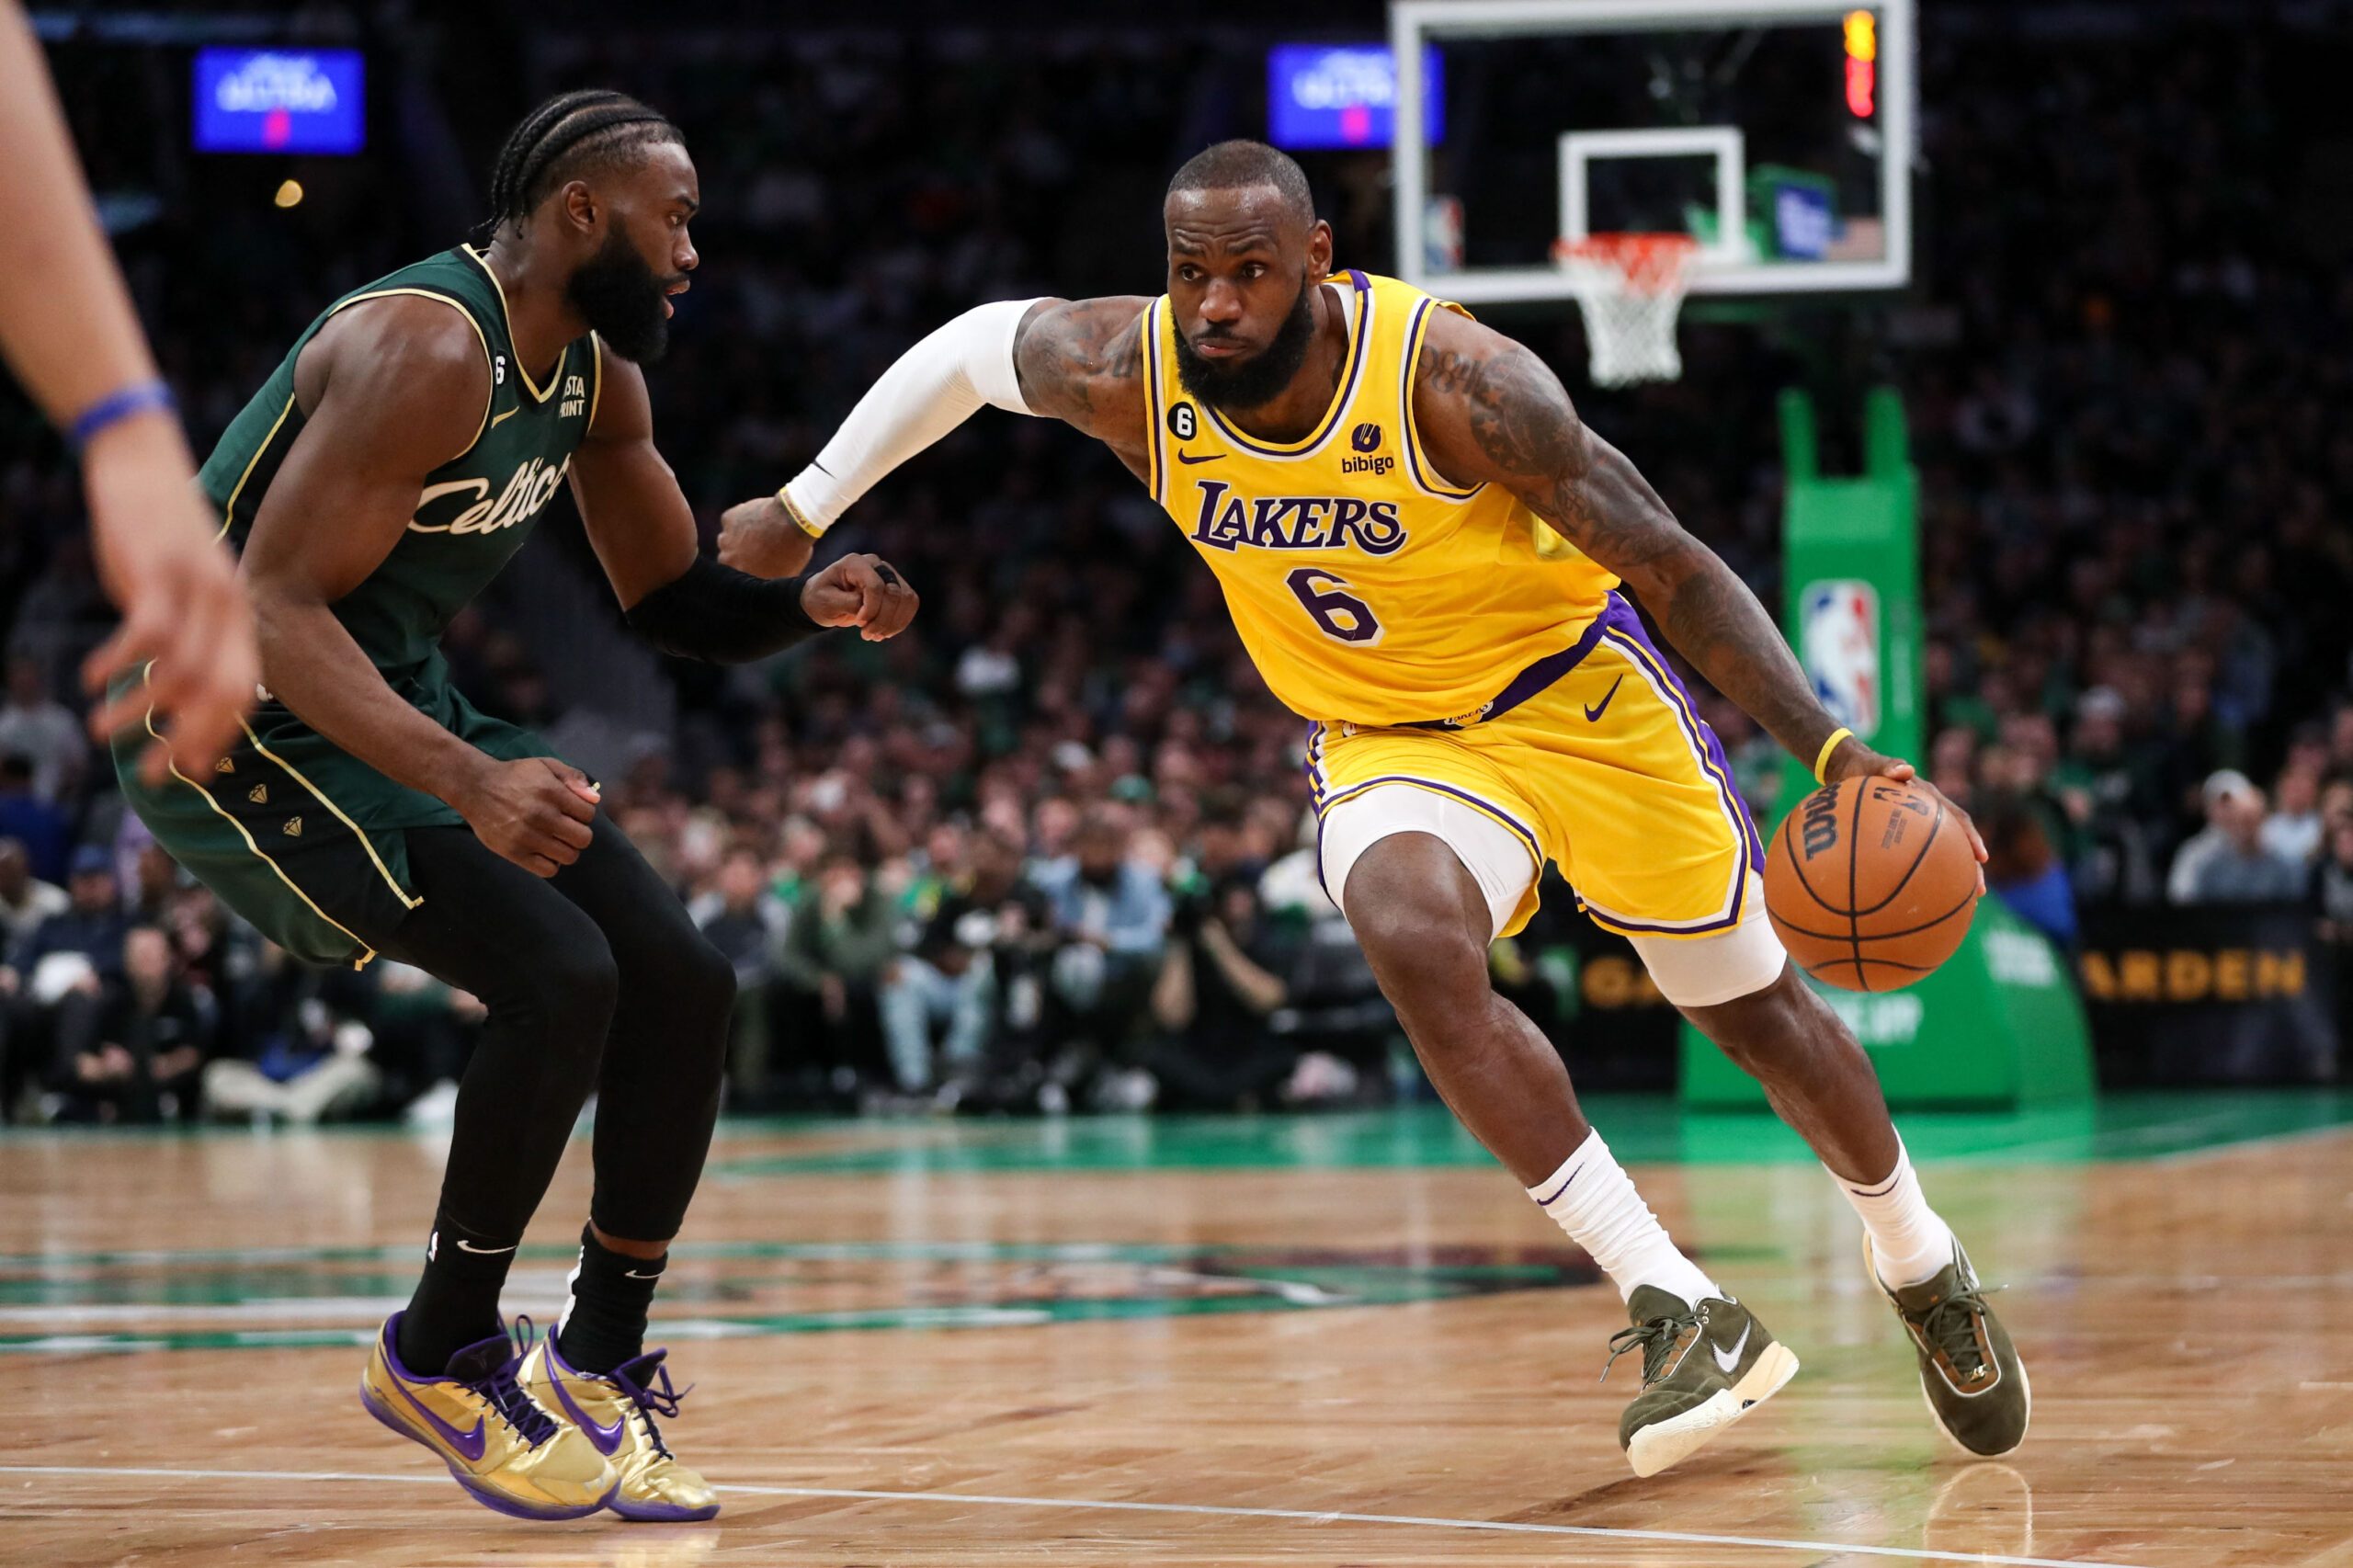 ‘We got cheated’: Lakers fume over referee decision in overtime loss to Celtics